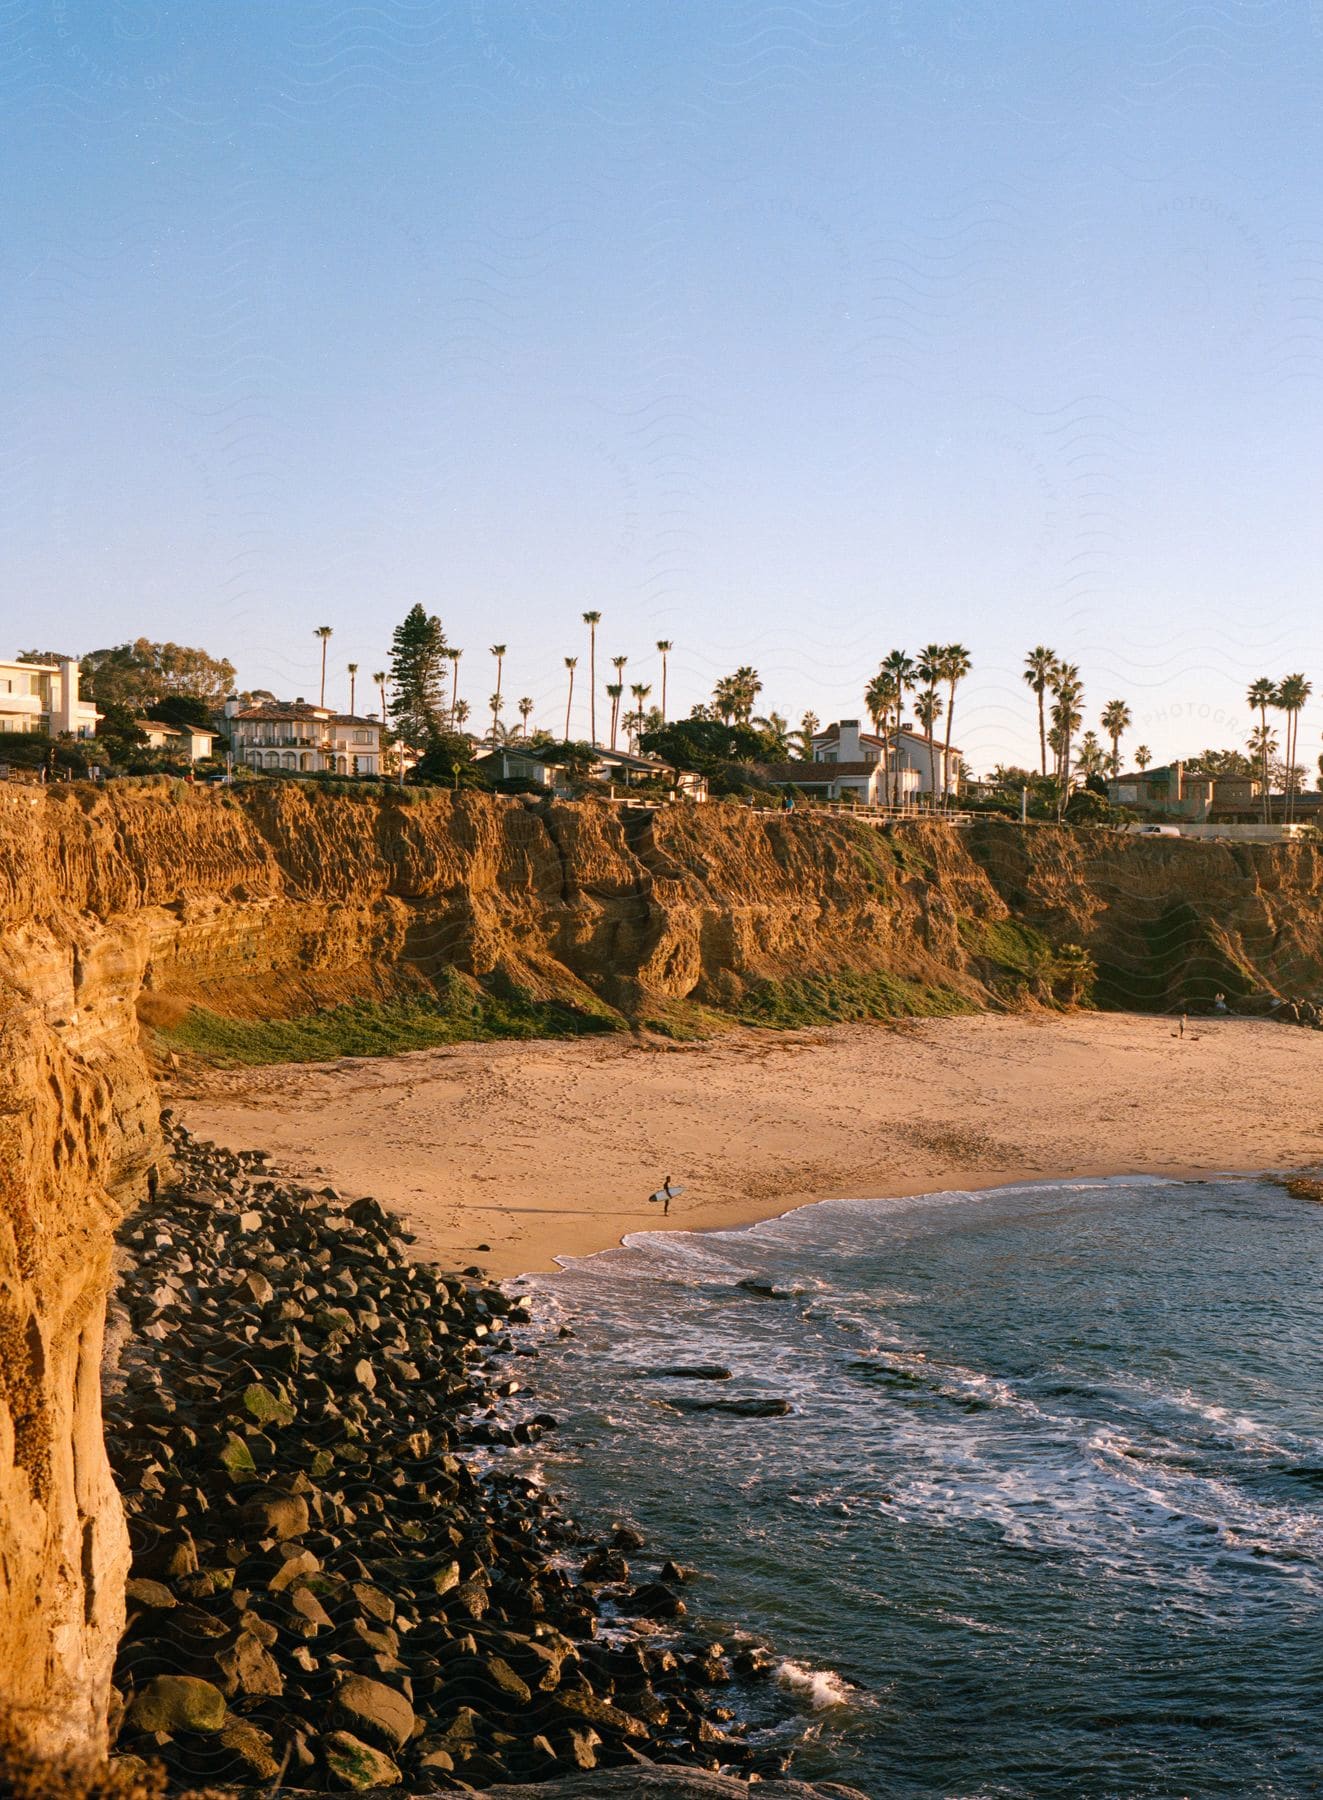 A person walks on a beach with palm trees and houses on a cliff above and ocean waves at the shore